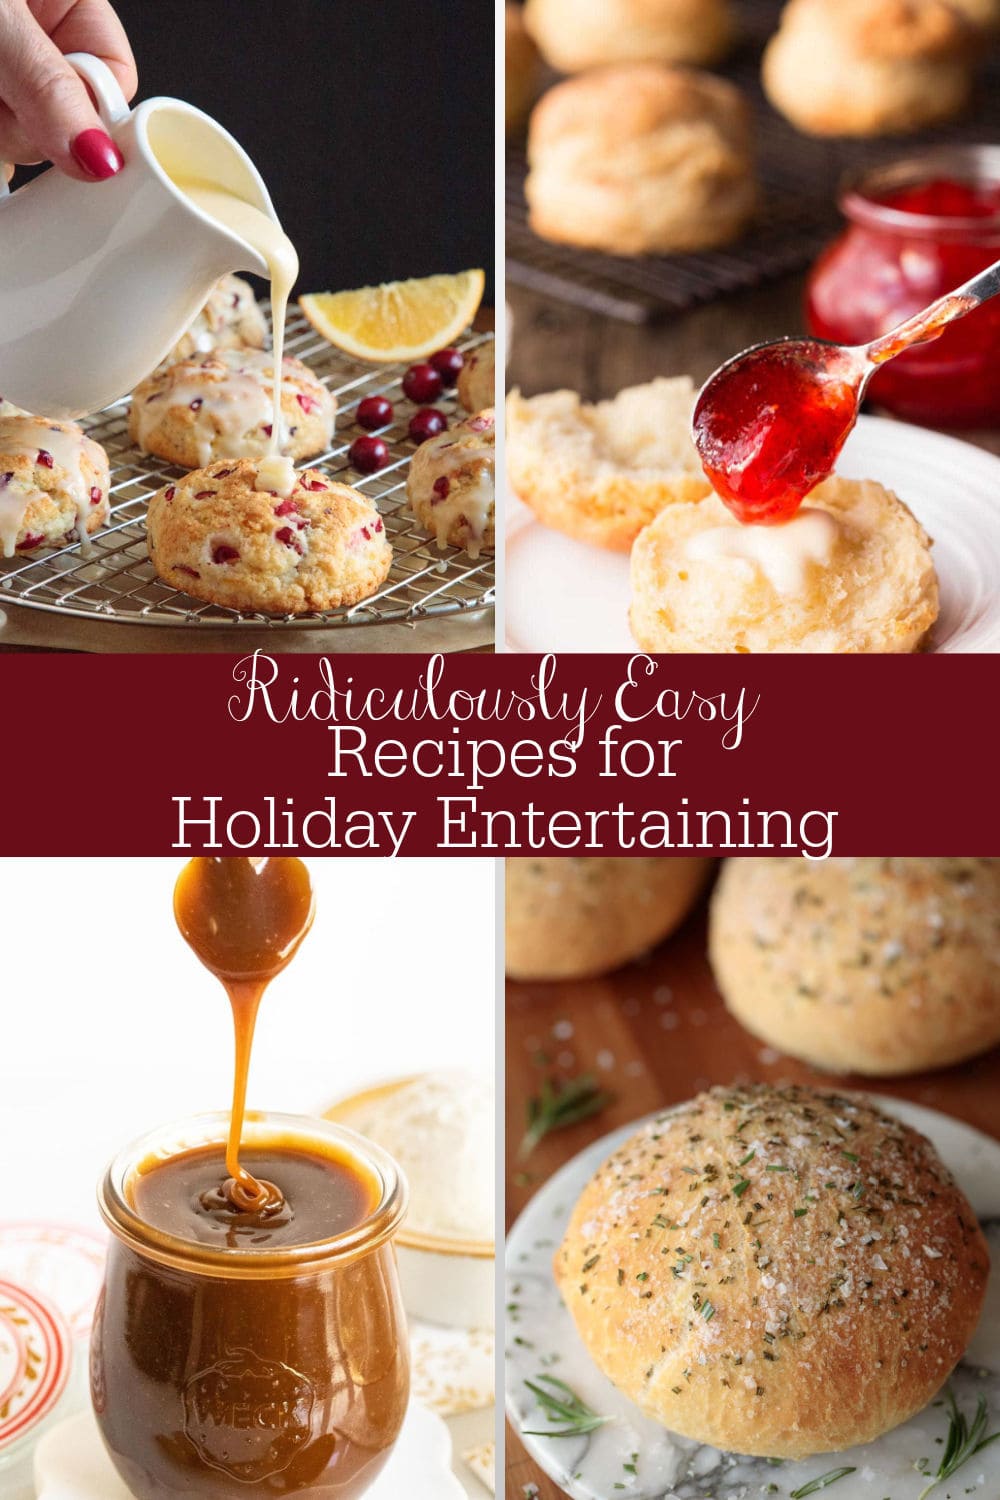 Ridiculously Easy Recipes for Ridiculously Low Stress Holidays!